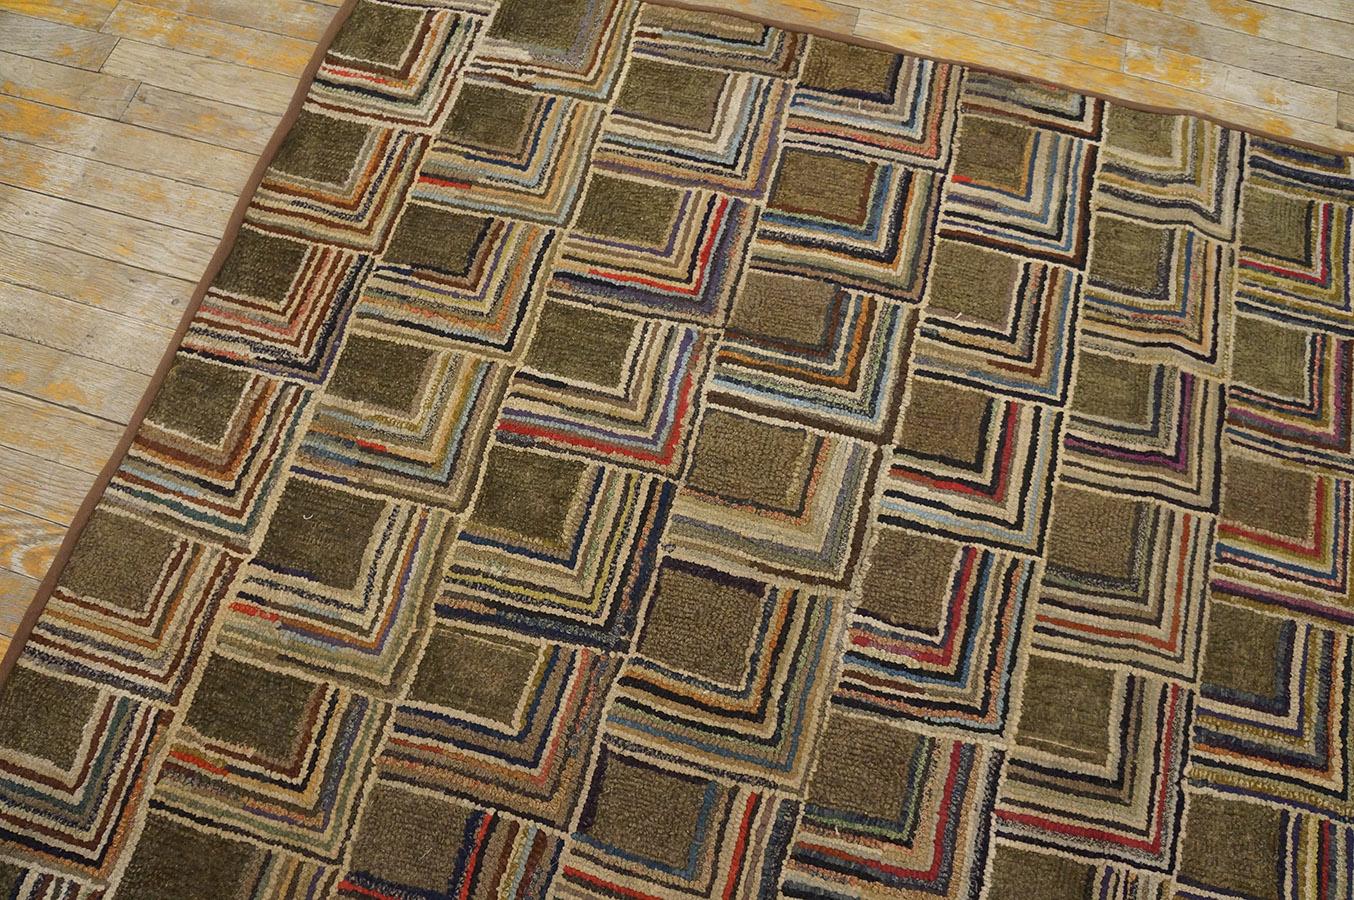 Early 20th Century American Hooked Rug ( 4'8